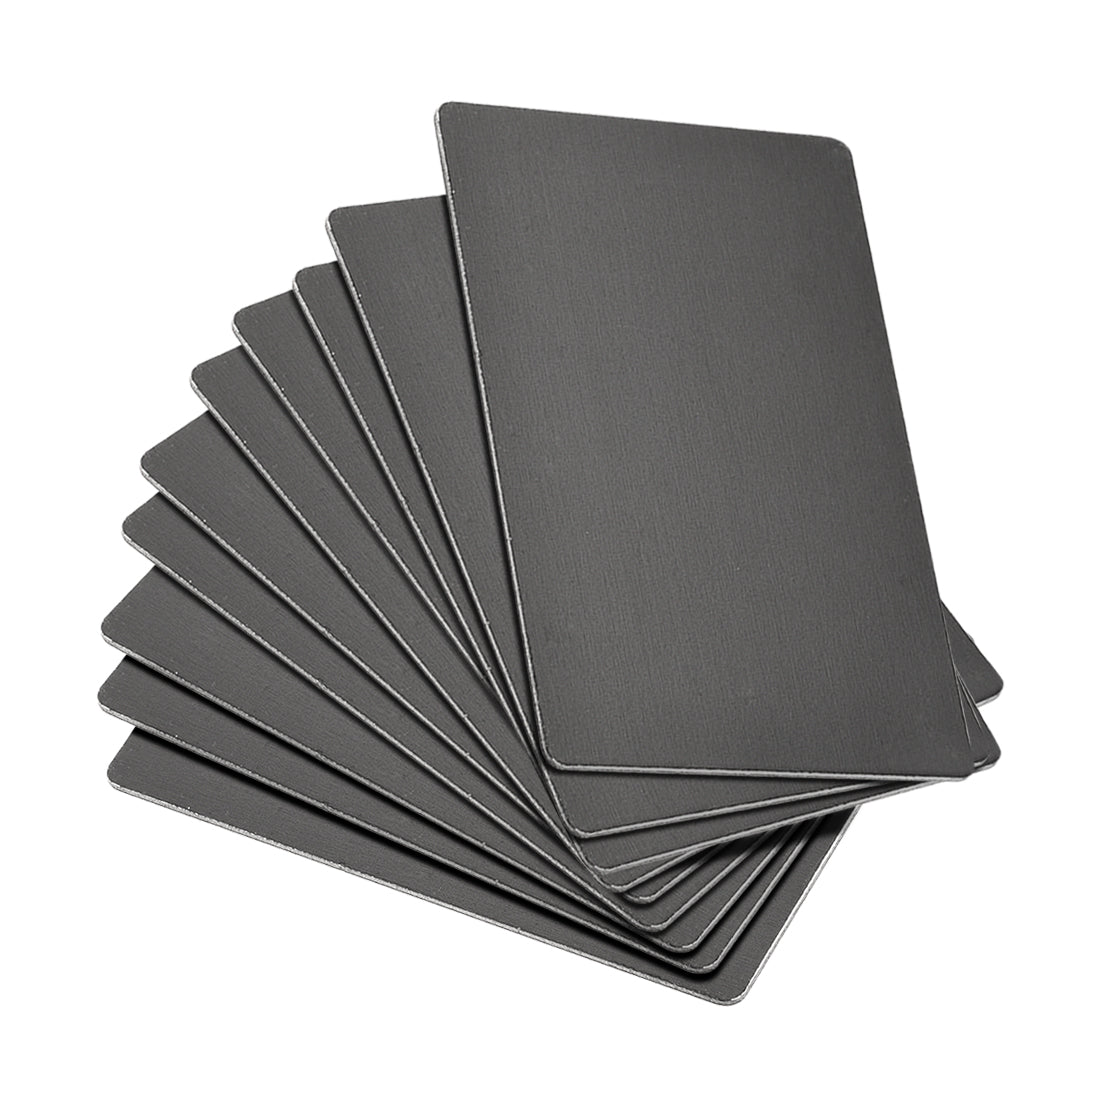 uxcell Uxcell Blank Metal Cards, Anodized Aluminum Plate for DIY Laser Printing